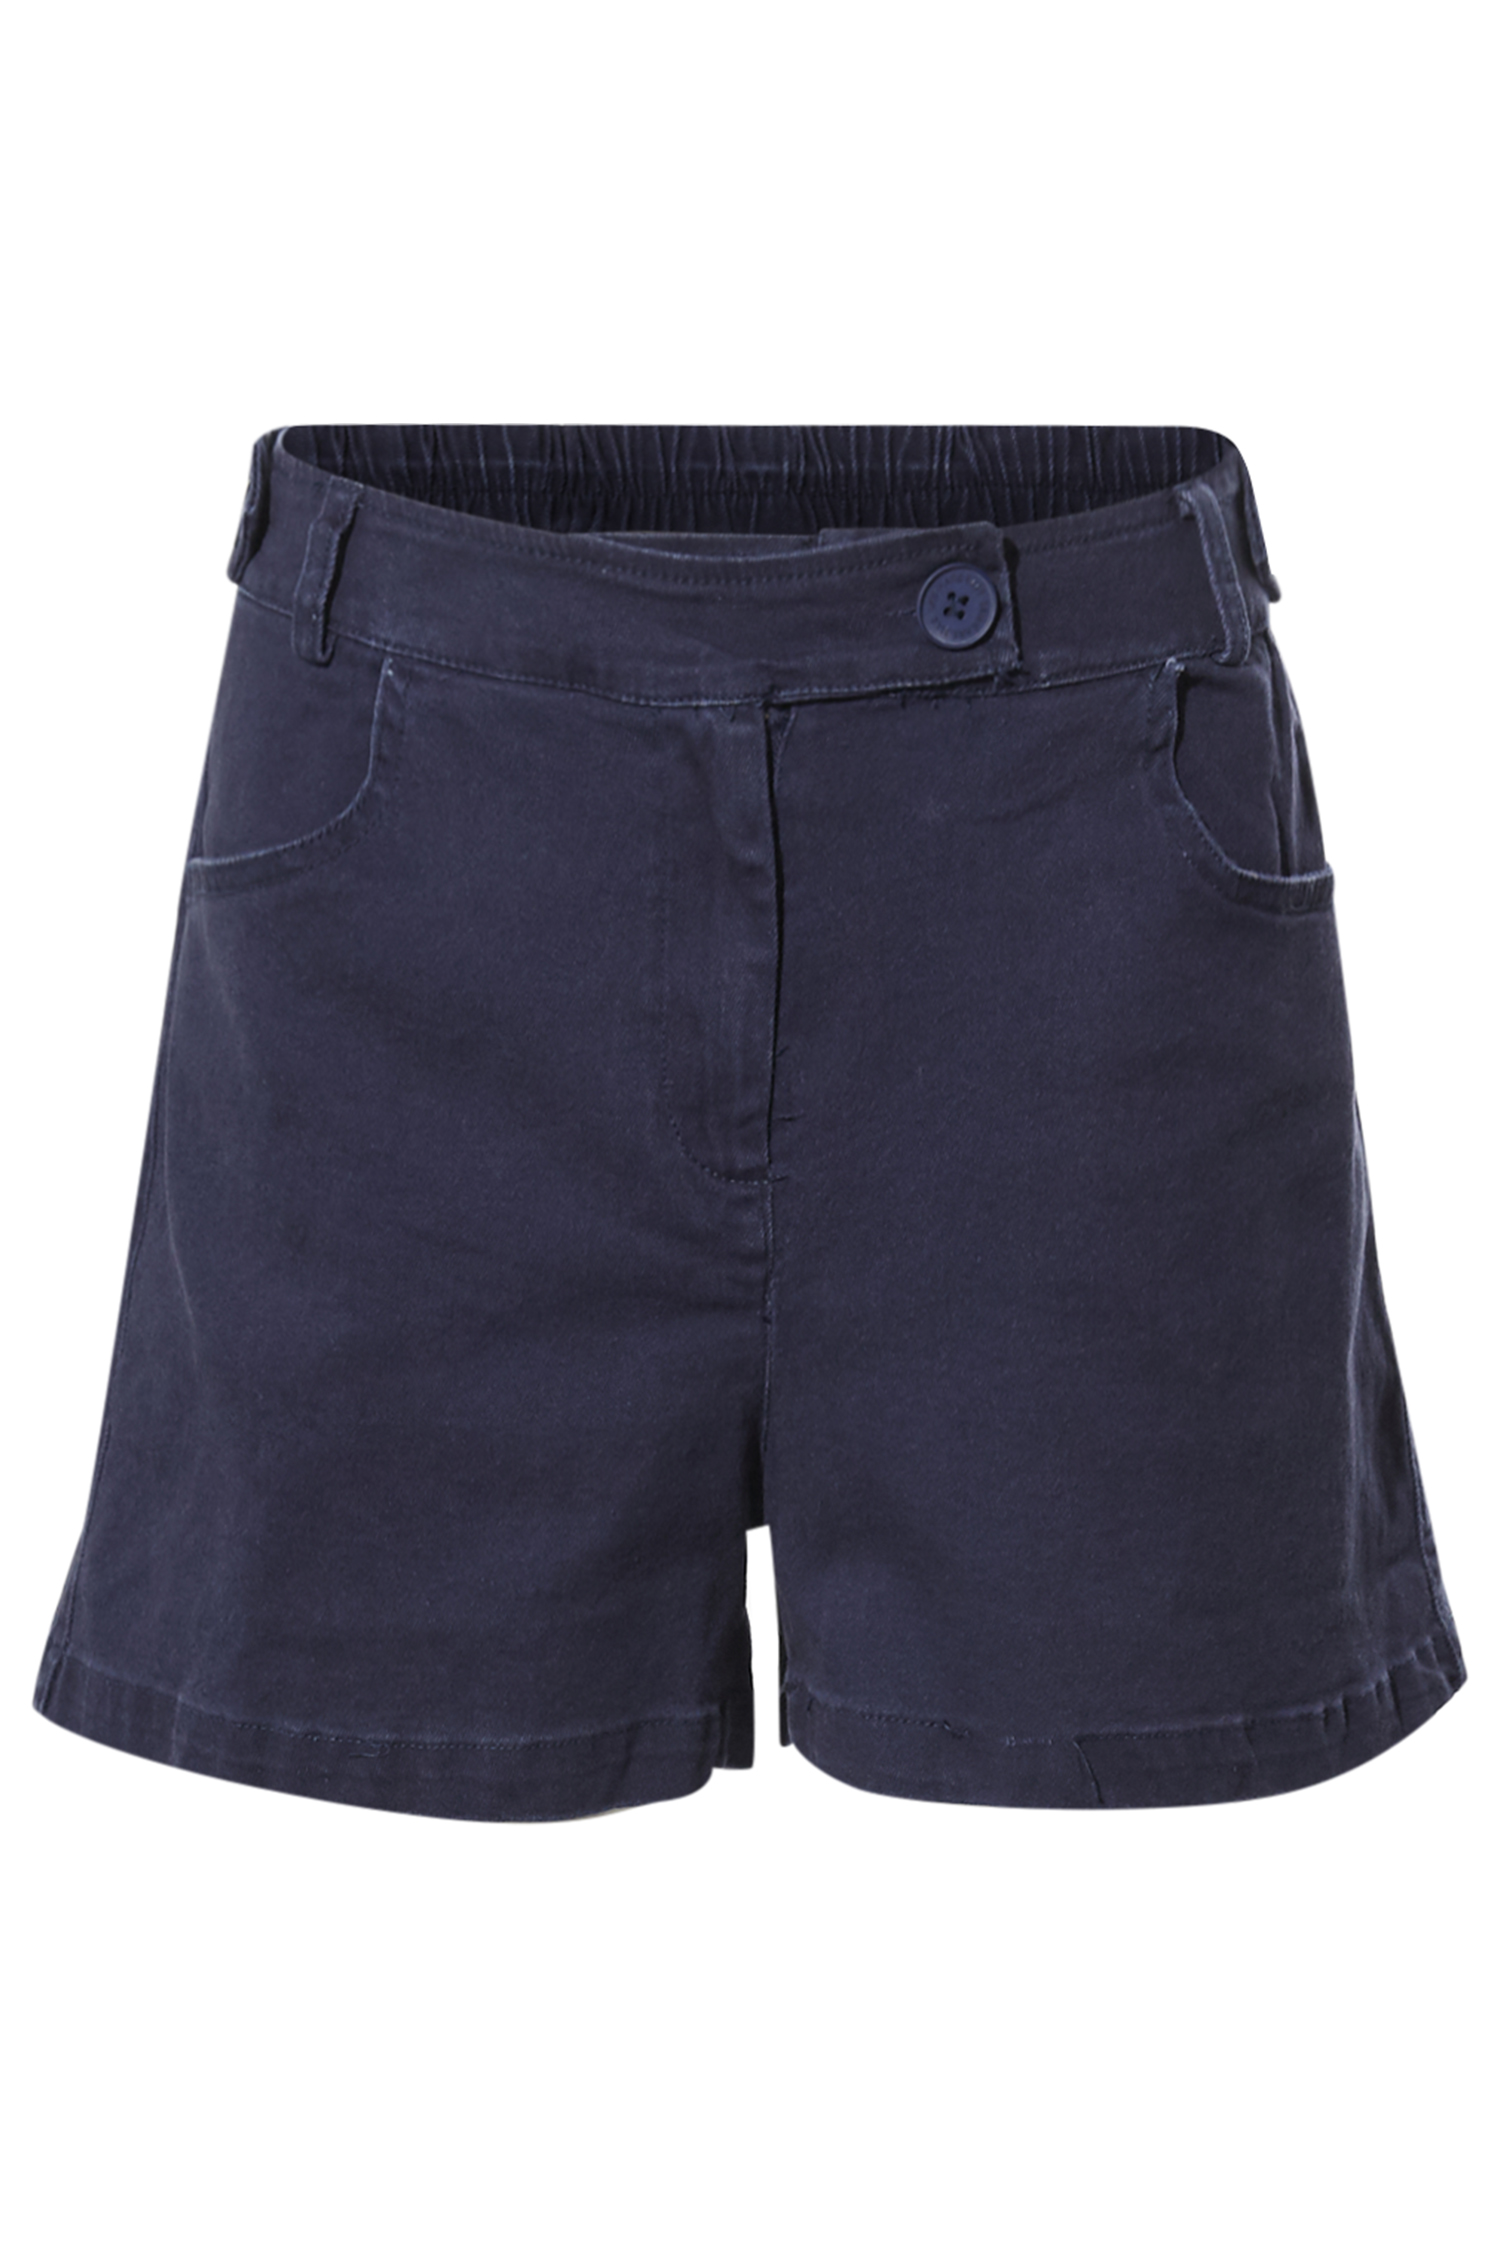 Skies are Blue Side Button Shorts